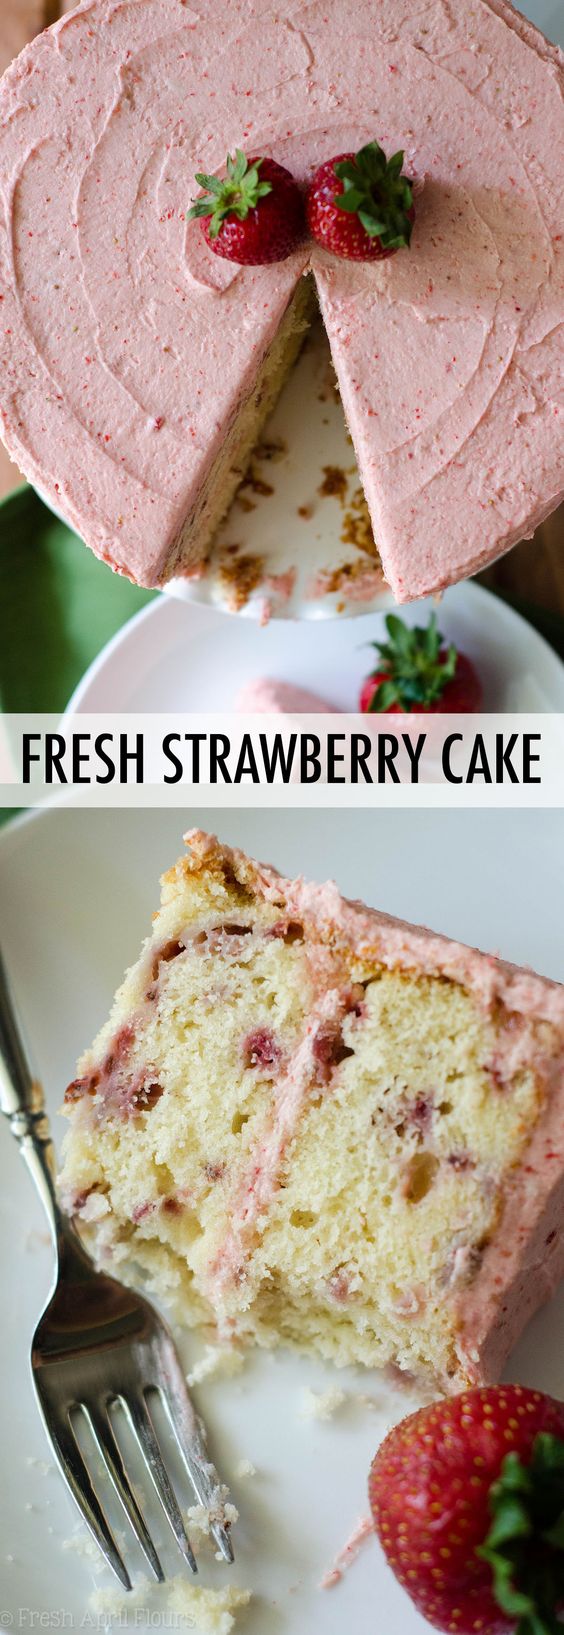 Soft and fluffy homemade strawberry cake made with fresh strawberries and topped with a creamy strawberry buttercream. via @frshaprilflours